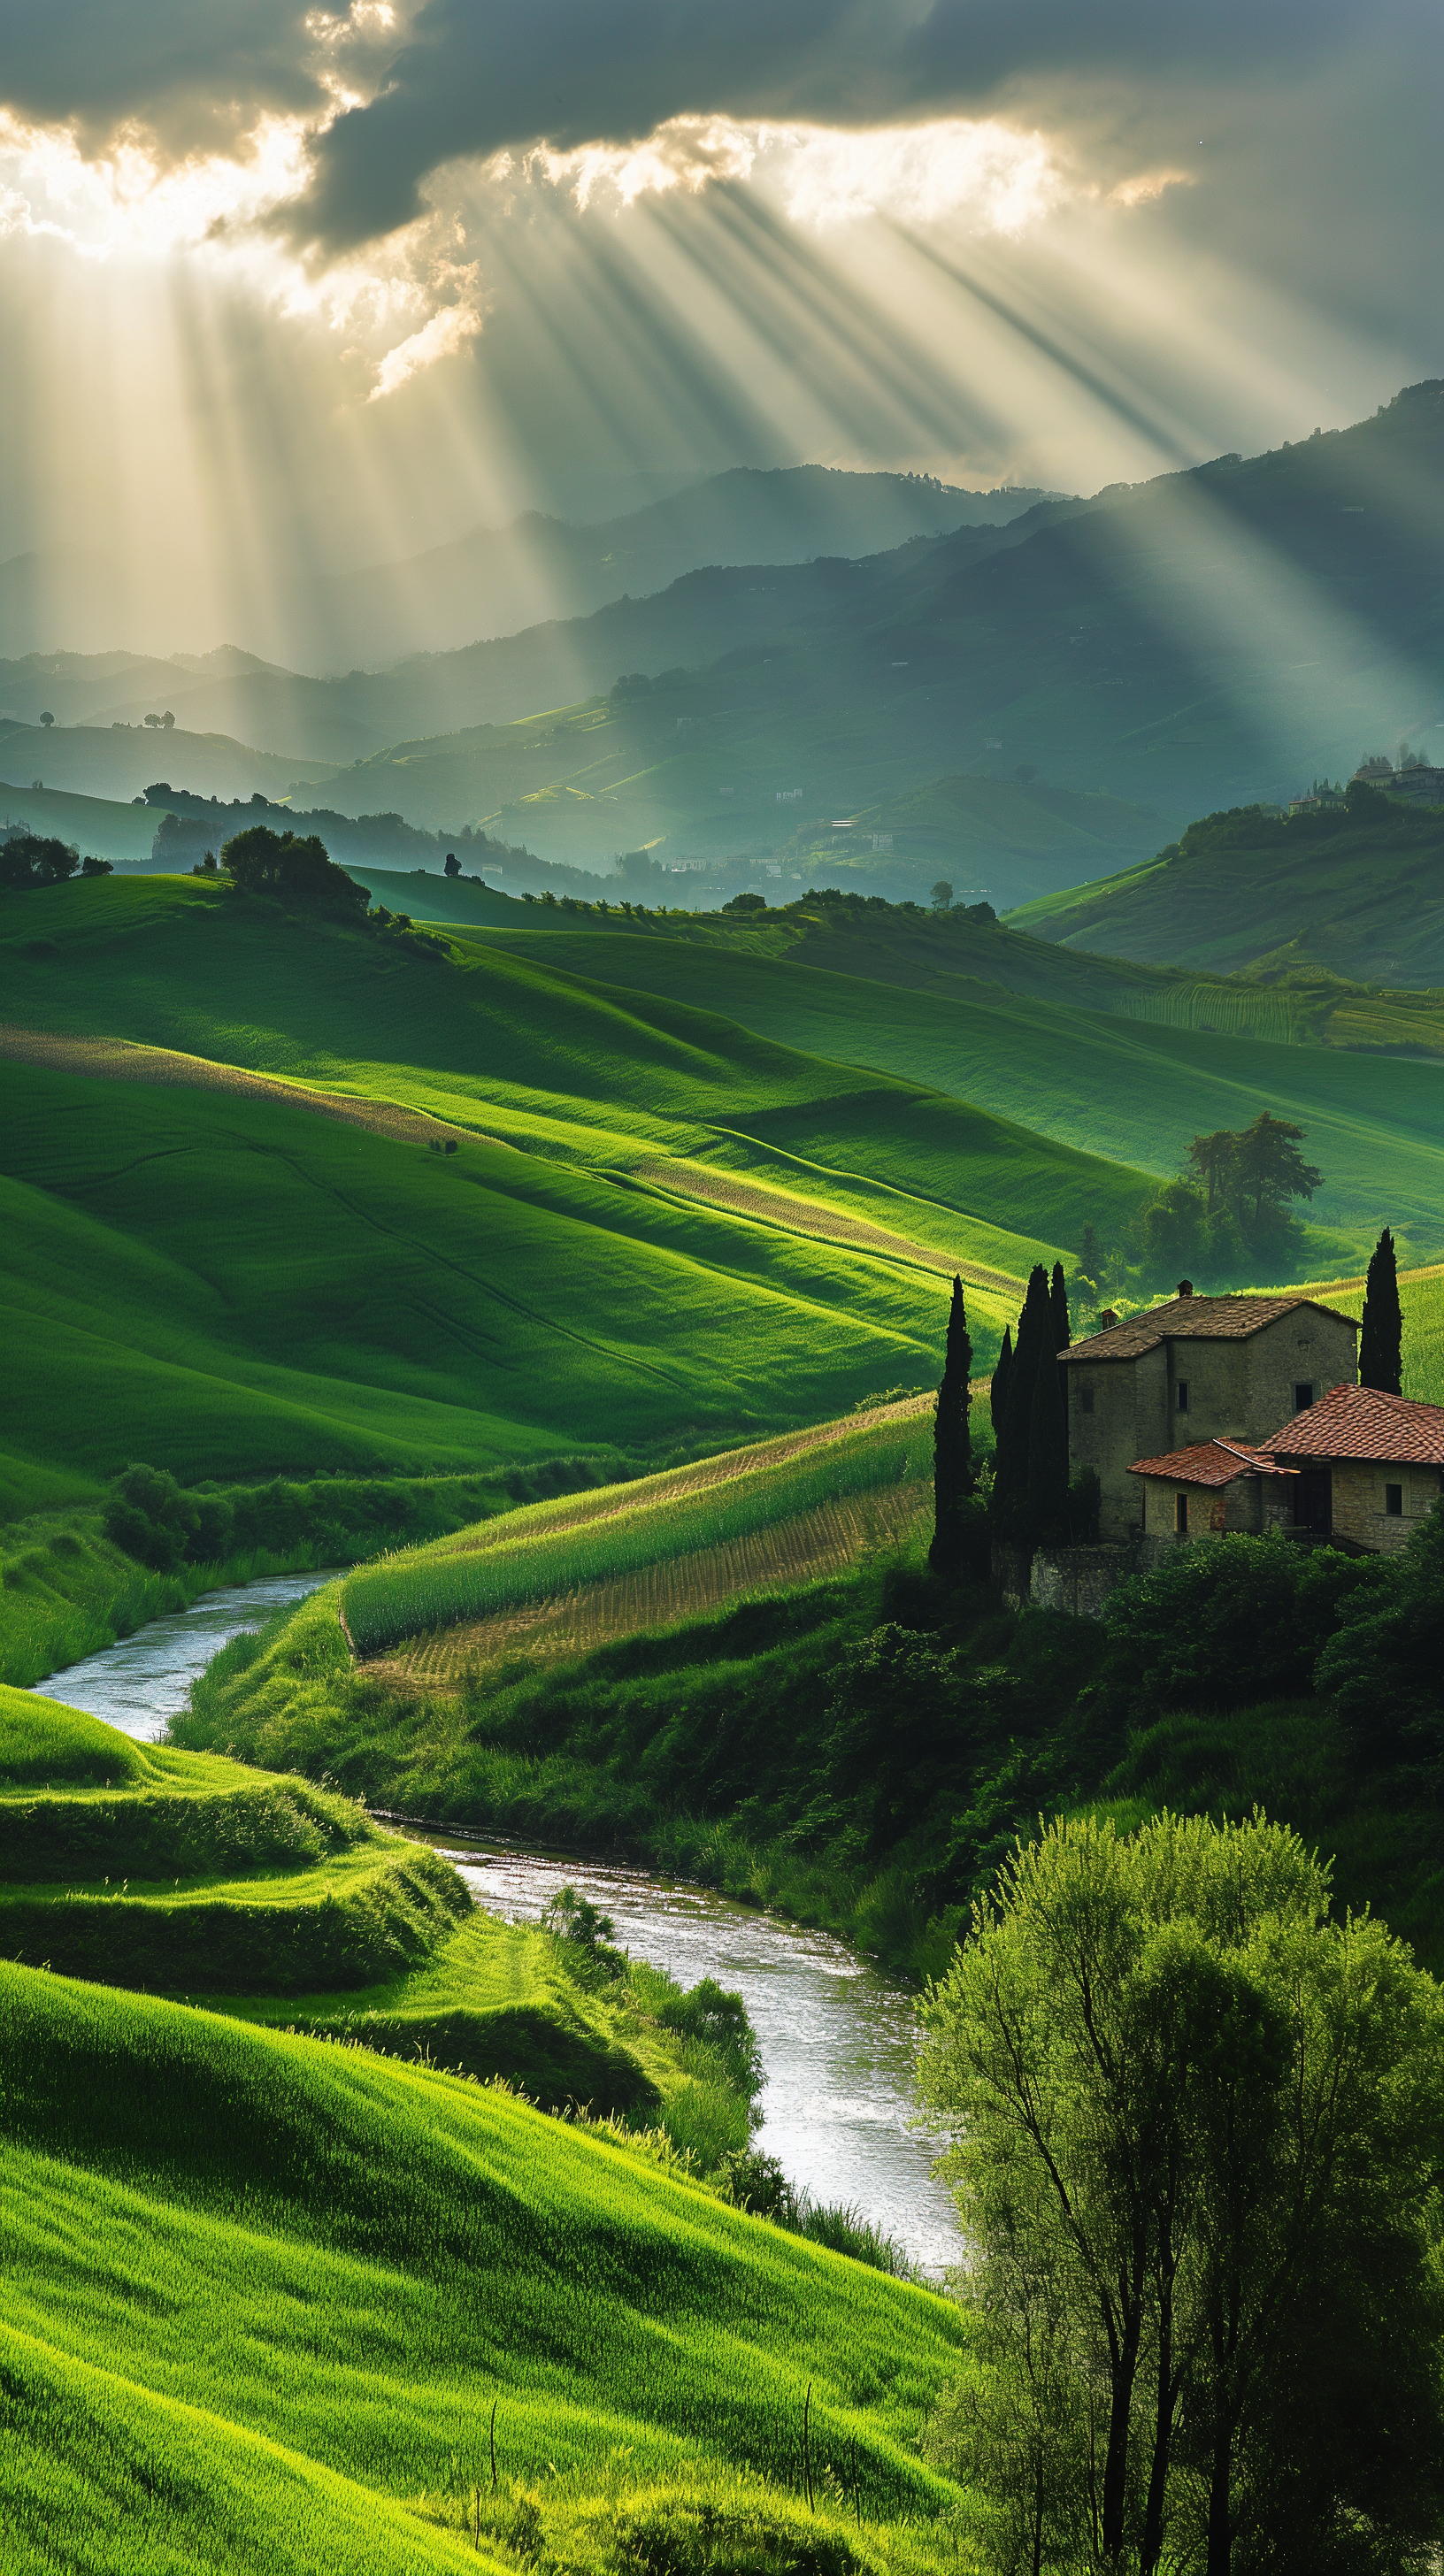 The lush rolling hills, kissed by the gentle rays of the sun